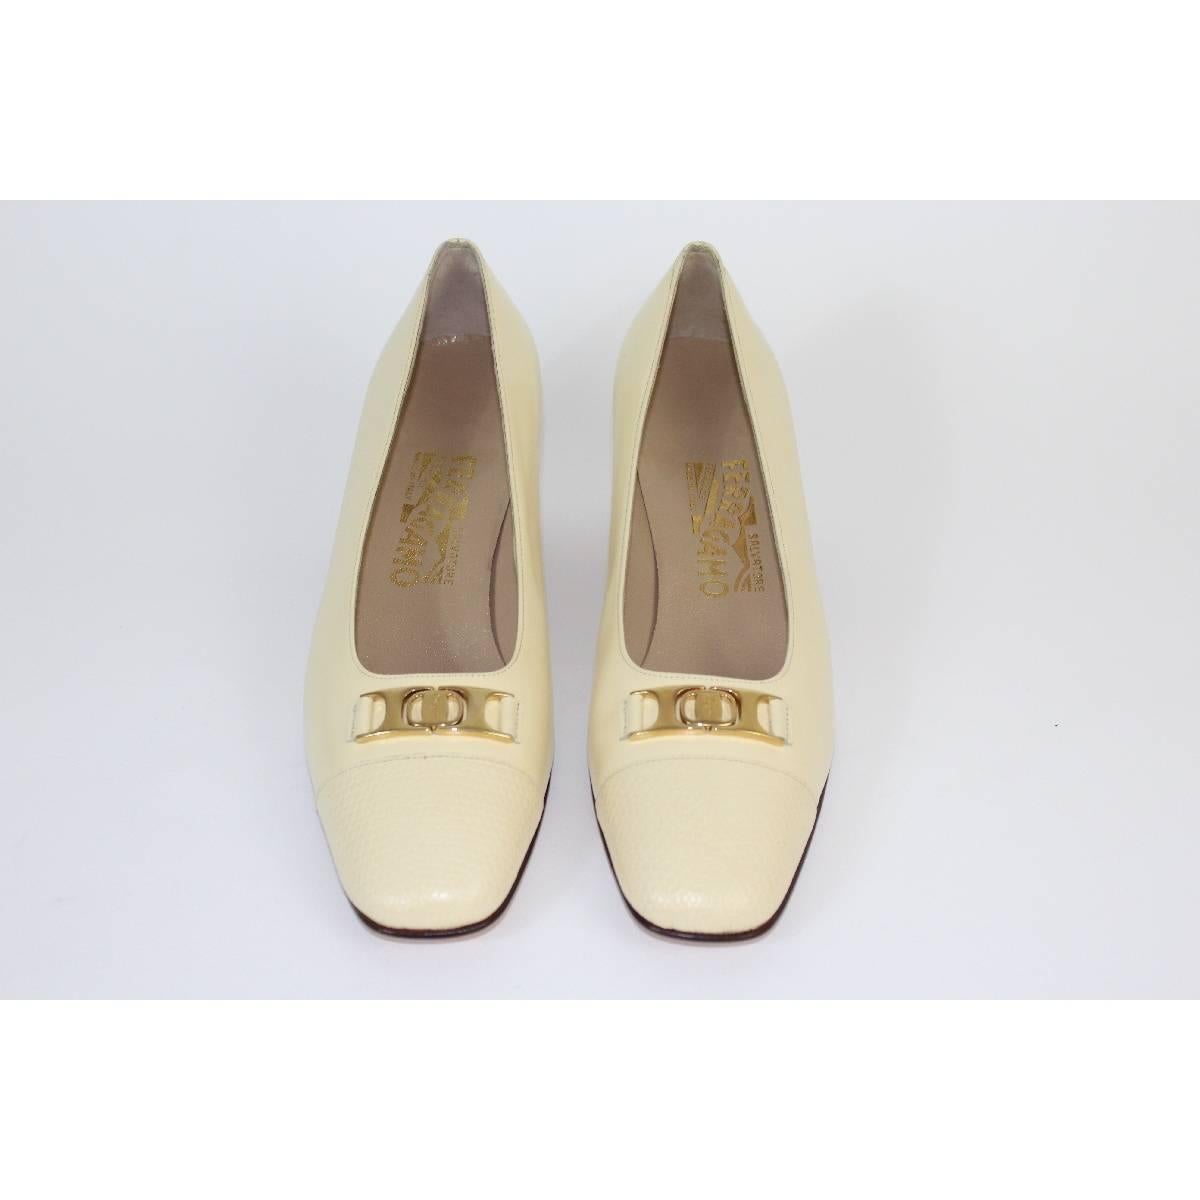 Salvatore Ferragamo ivory leather shoes NWT women's size 9 us made italy new  In New Condition For Sale In Brindisi, IT